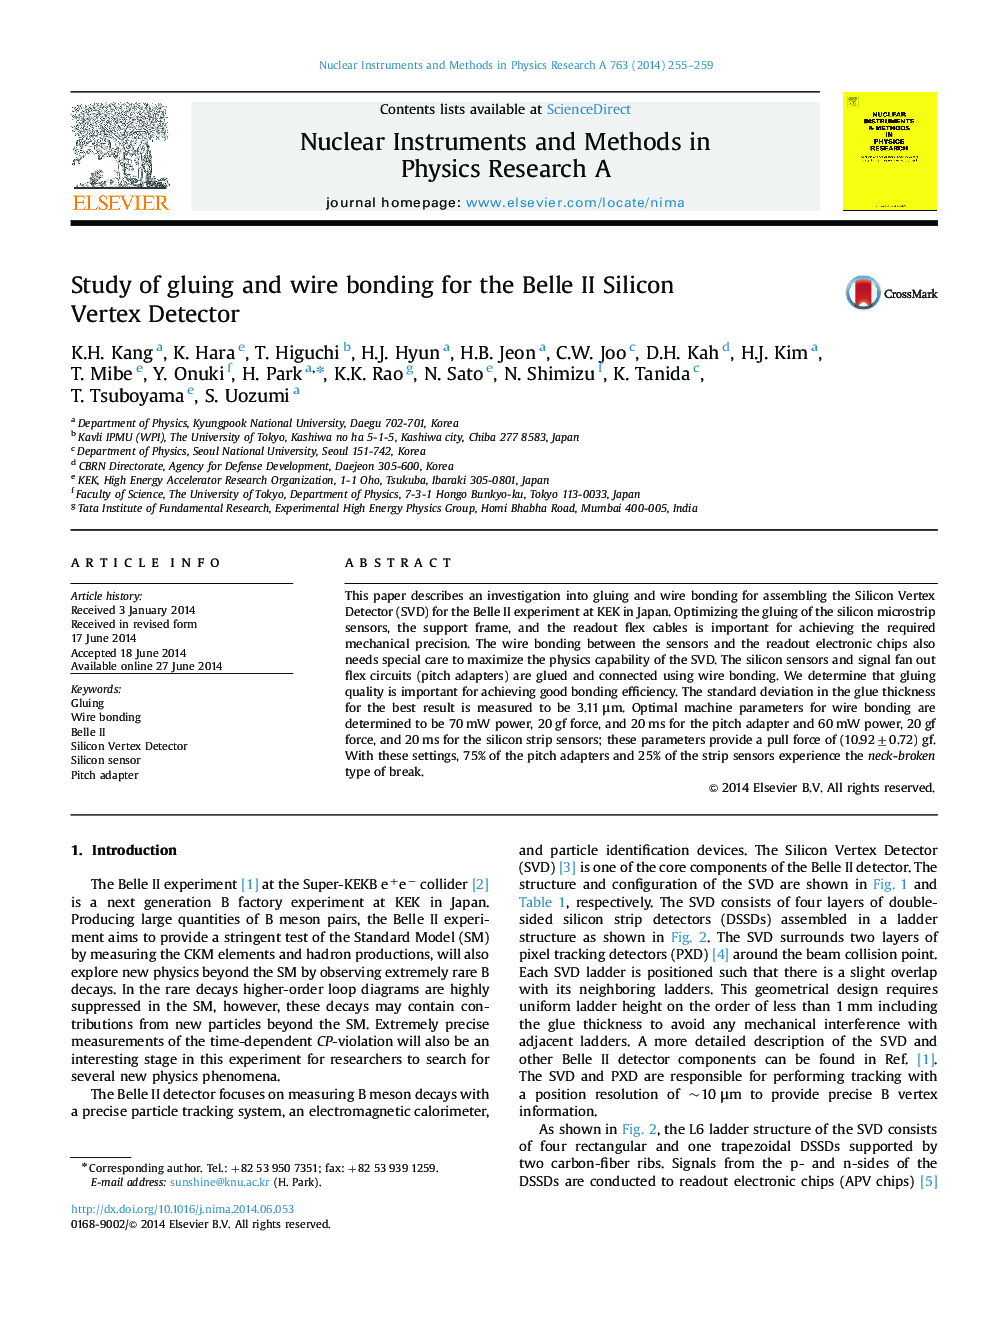 Study of gluing and wire bonding for the Belle II Silicon Vertex Detector